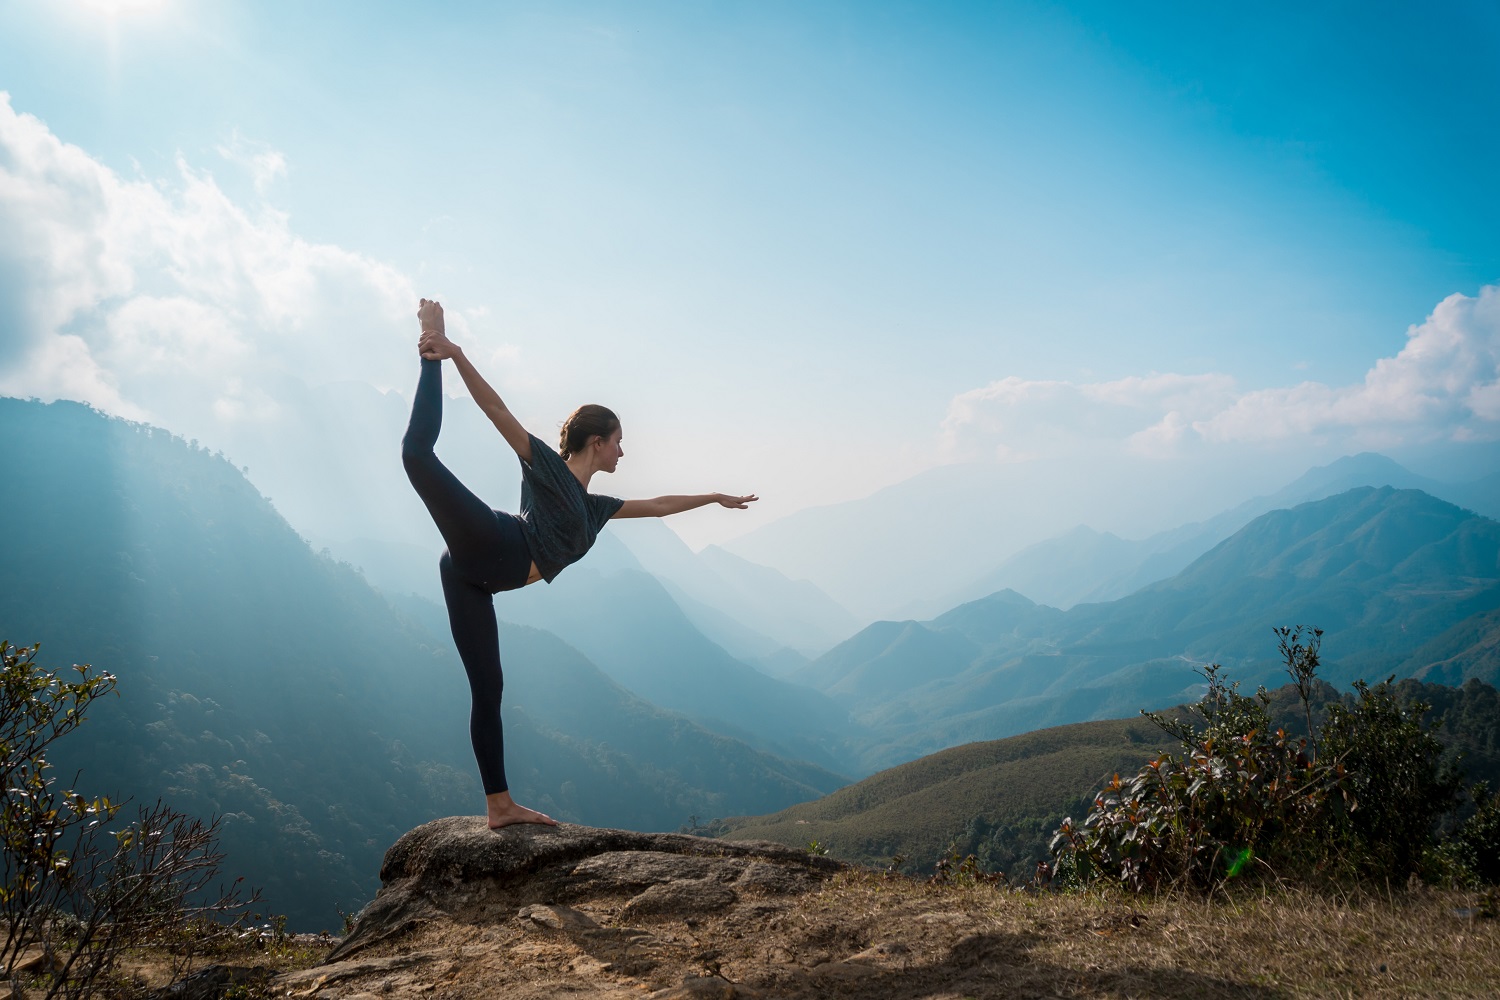 Refresh your mind and body with yoga while admiring the majestic nature in Sapa